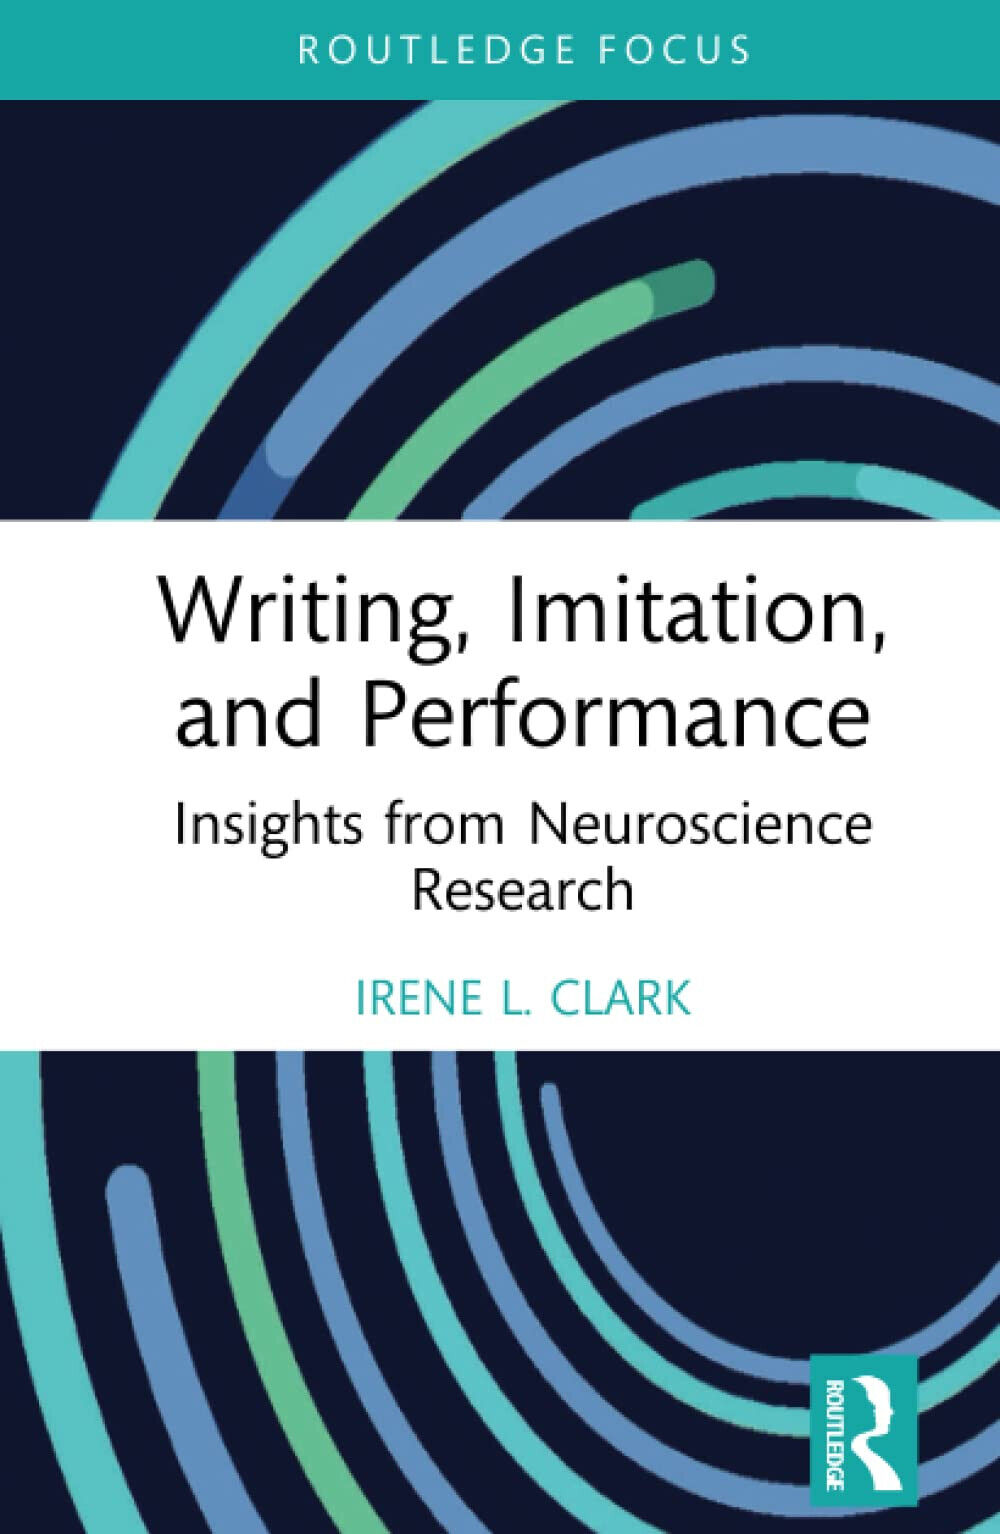 Writing, Imitation, And Performance - Irene L. Clark - Routledge, 2022